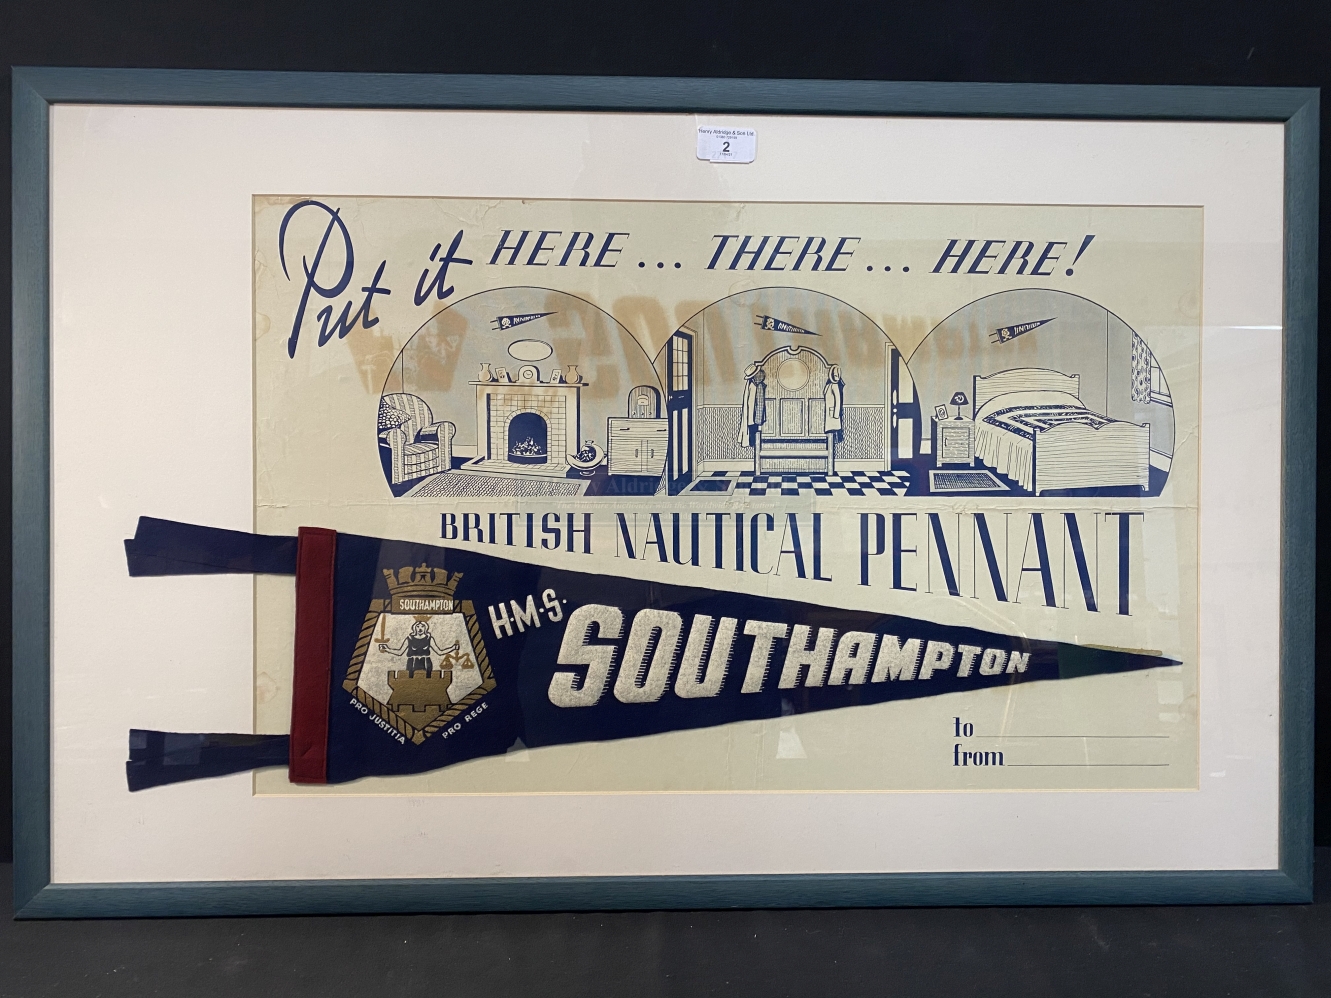 MARITIME: H.M.S. Southampton British nautical pennant, framed and glazed, formerly the property of